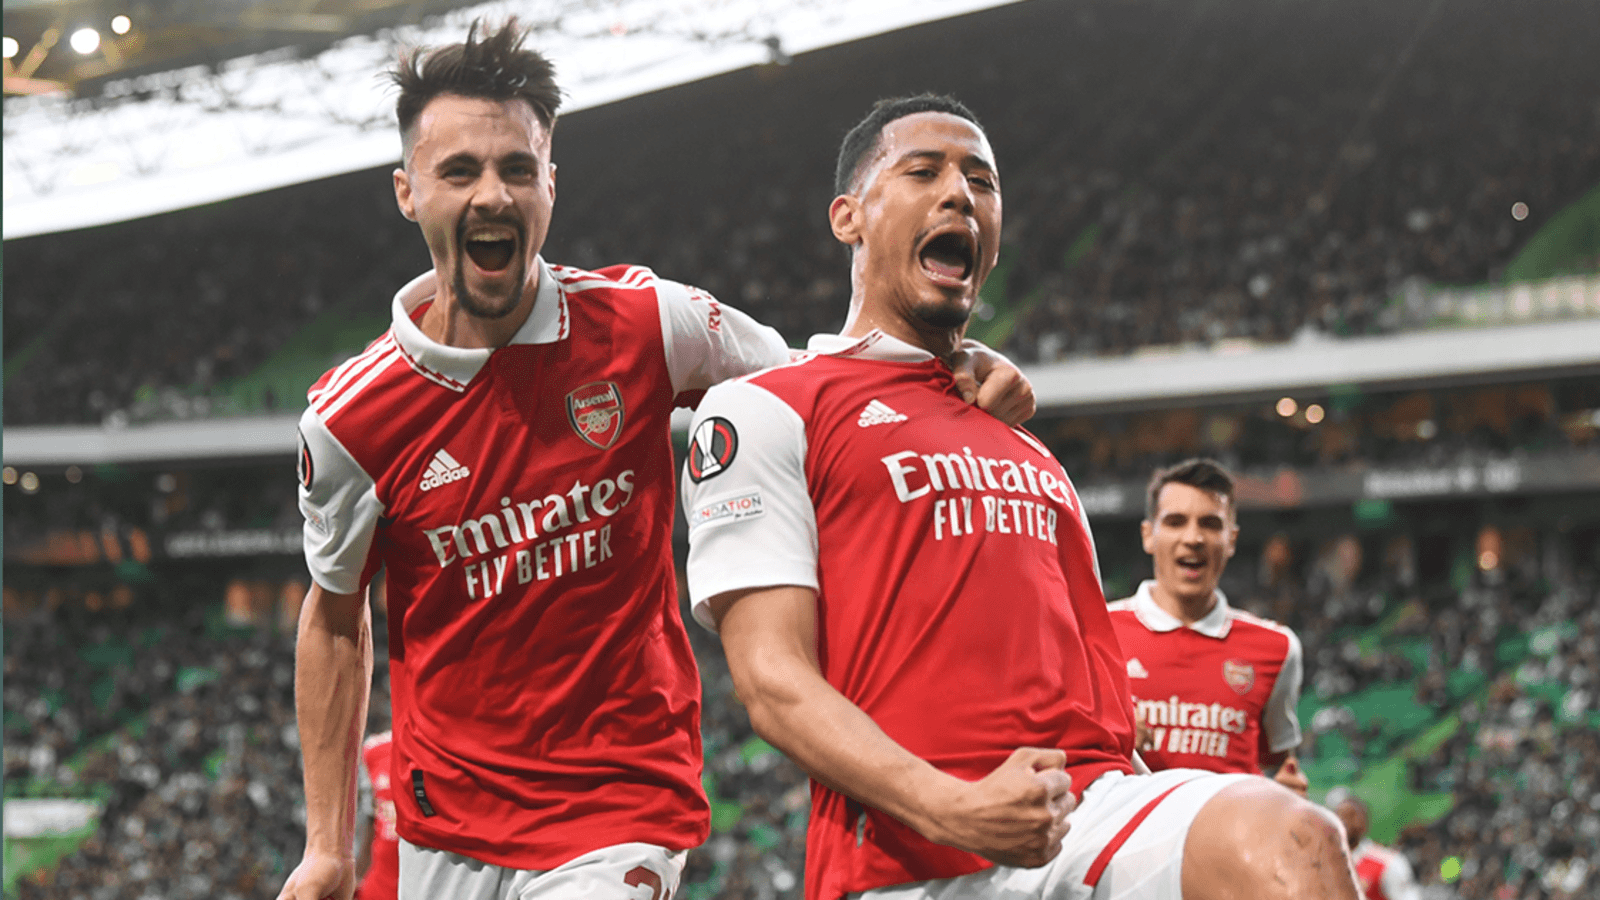 Arsenal's William Saliba celebrating his goal against Sporting CP with his teammates